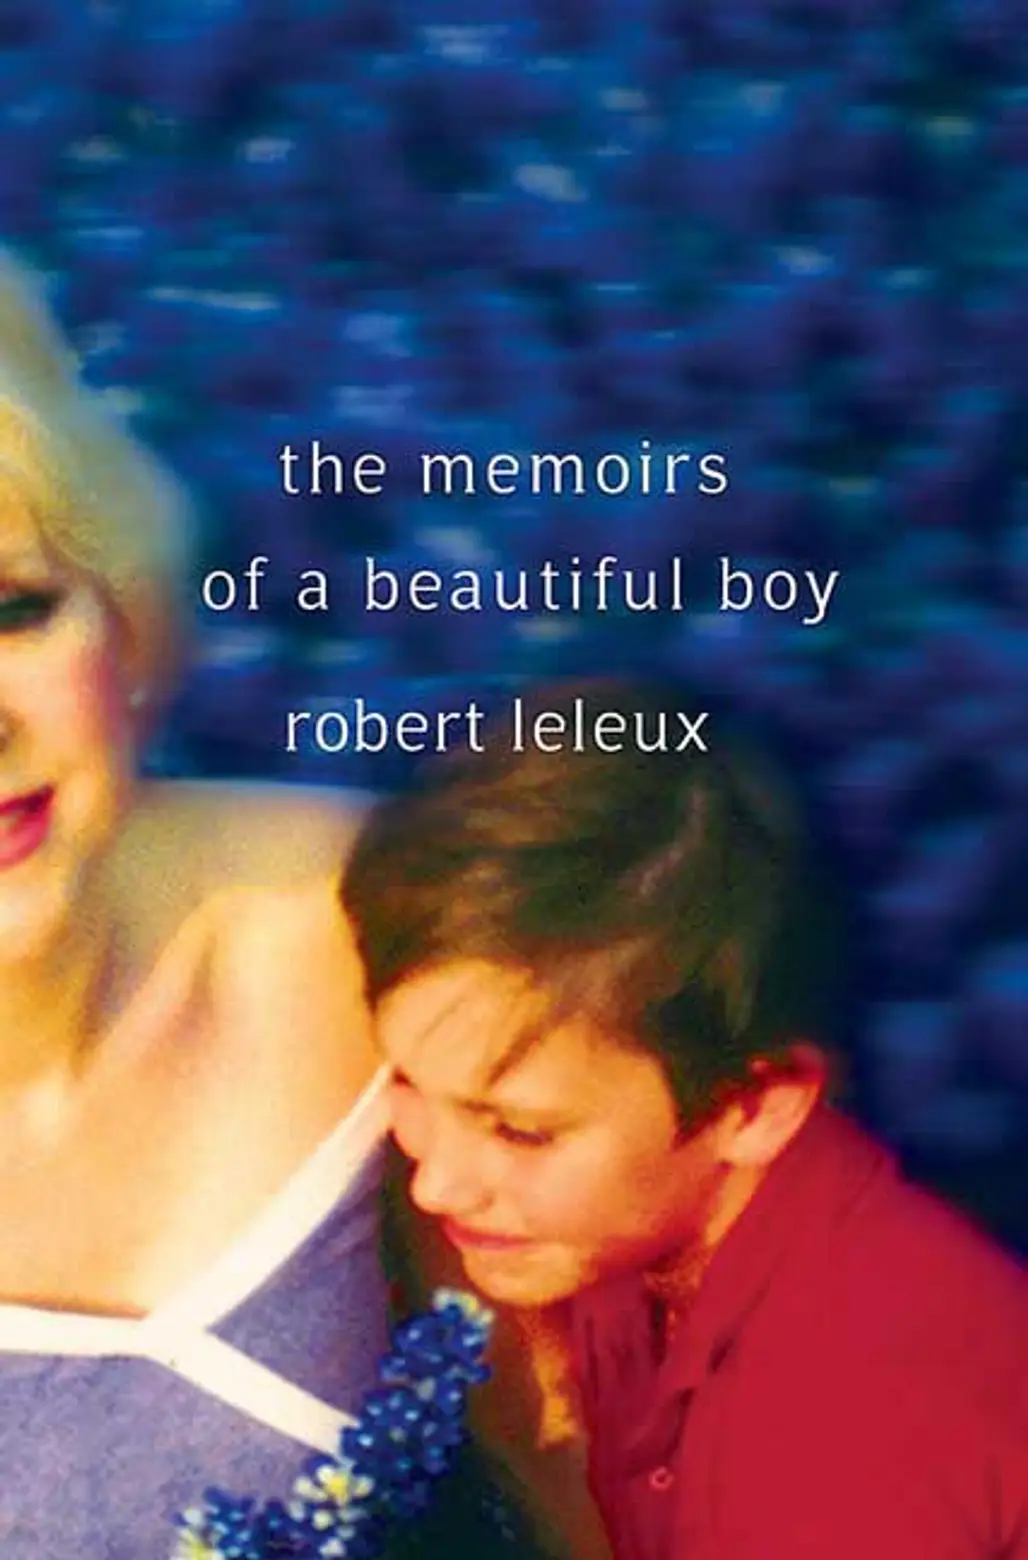 The Memoirs of a Beautiful Boy by Robert Leleux